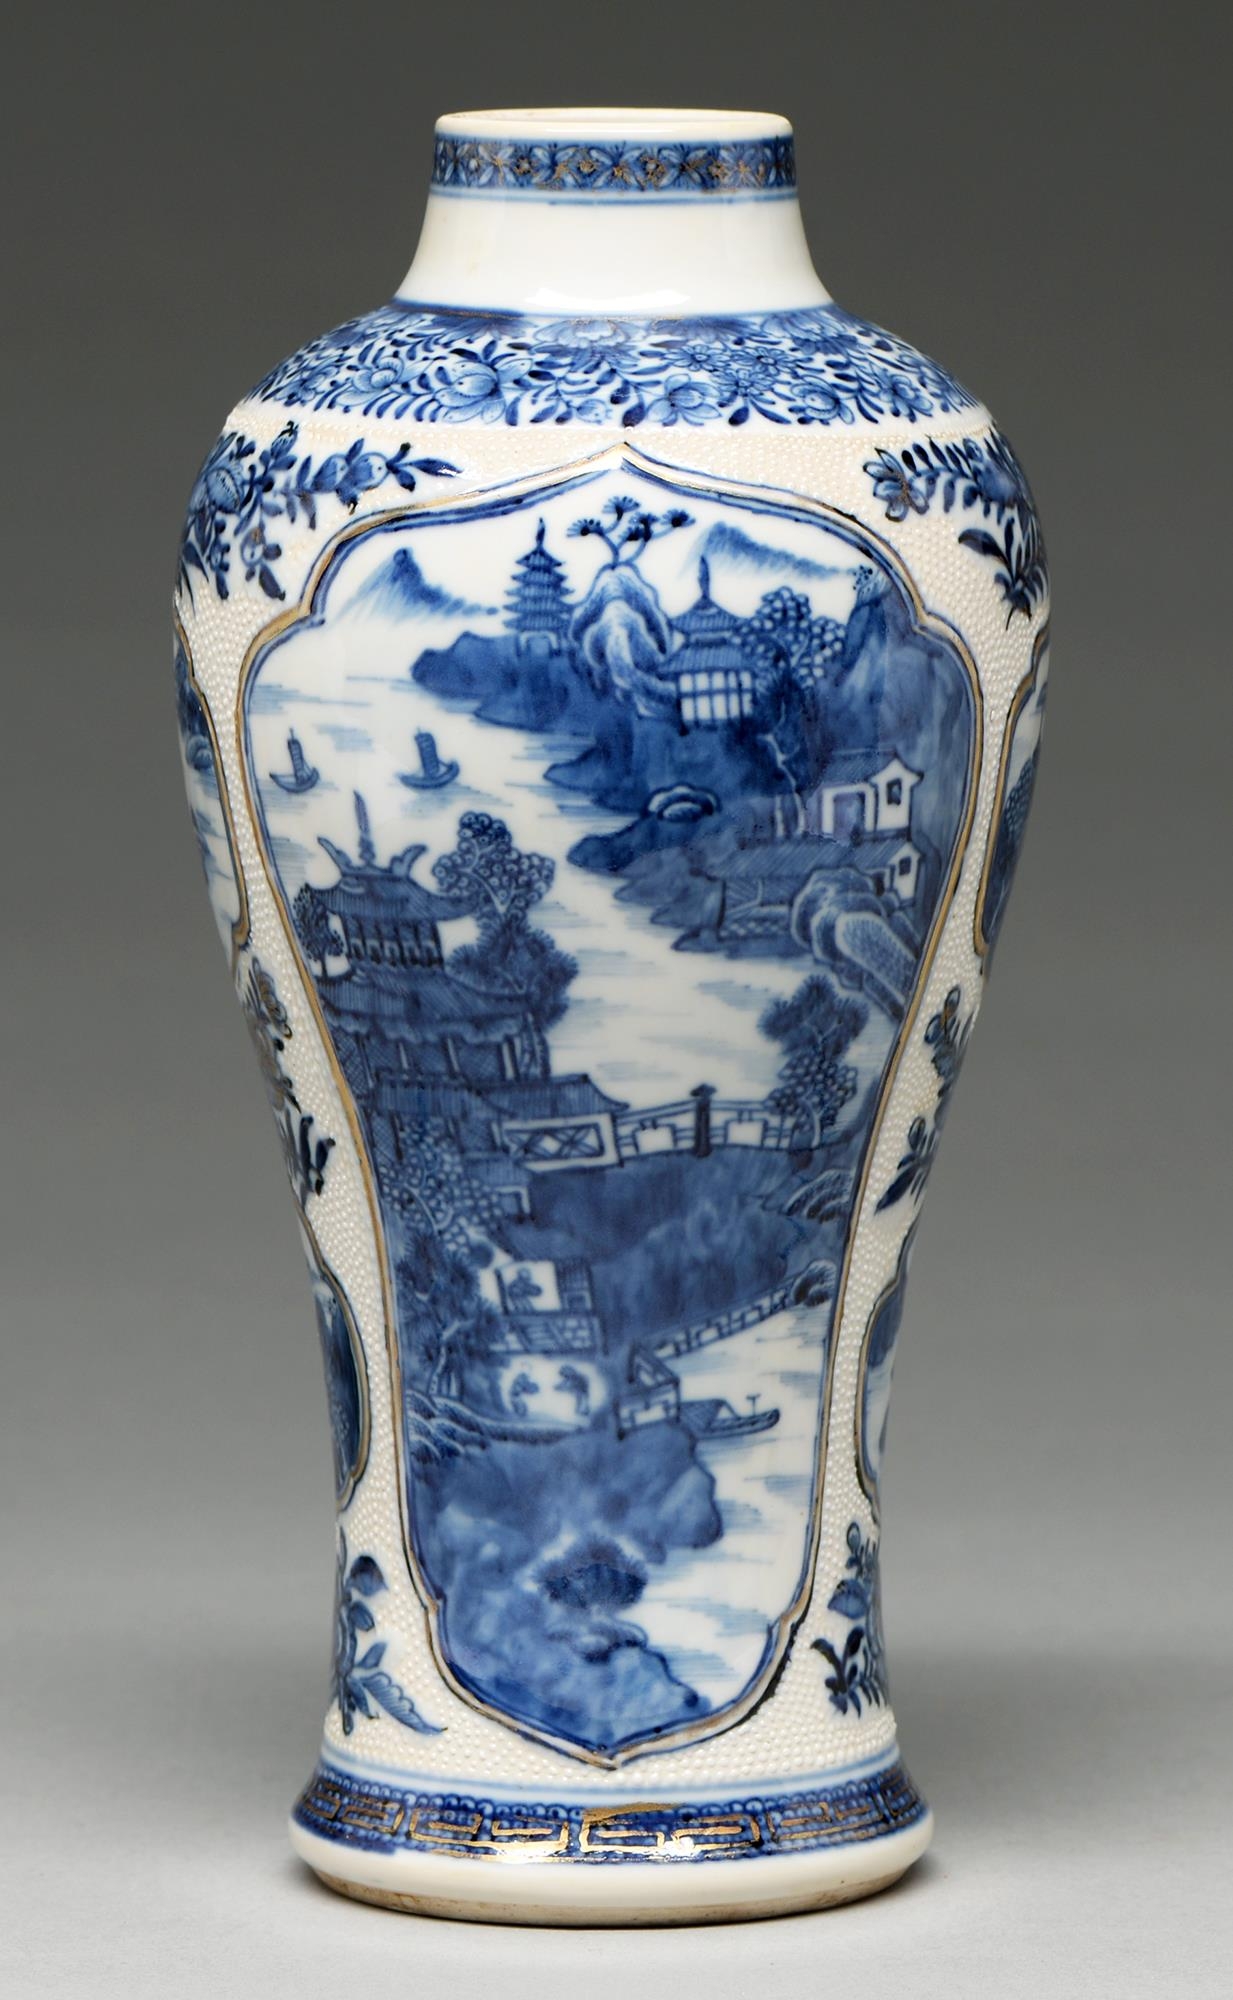 A Chinese blue and white baluster vase, late 18th c, painted with landscapes in six slightly